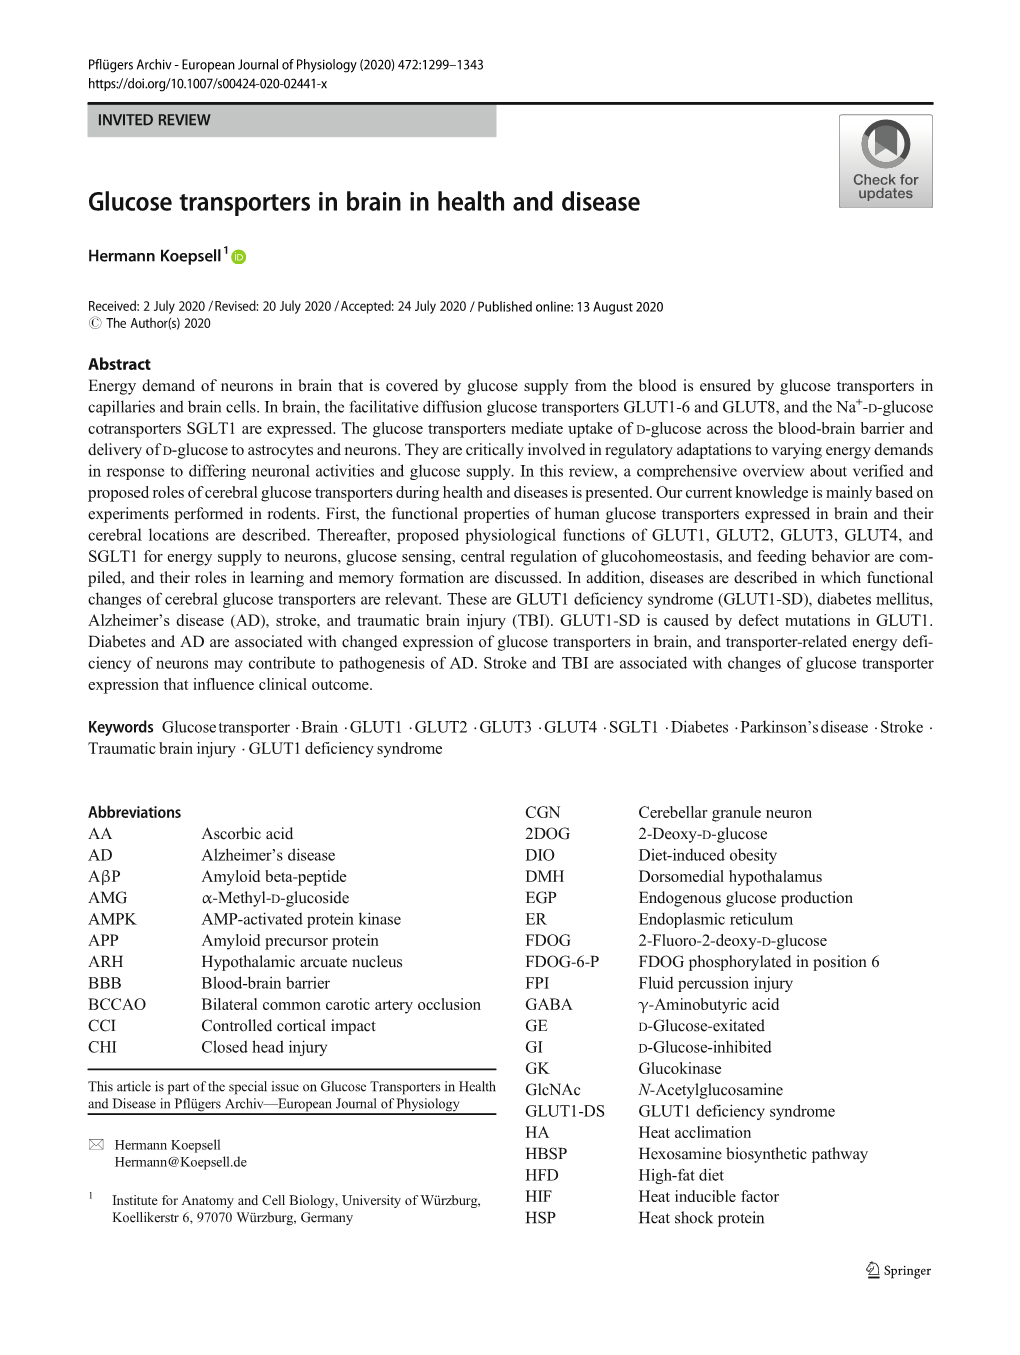 Glucose Transporters in Brain in Health and Disease